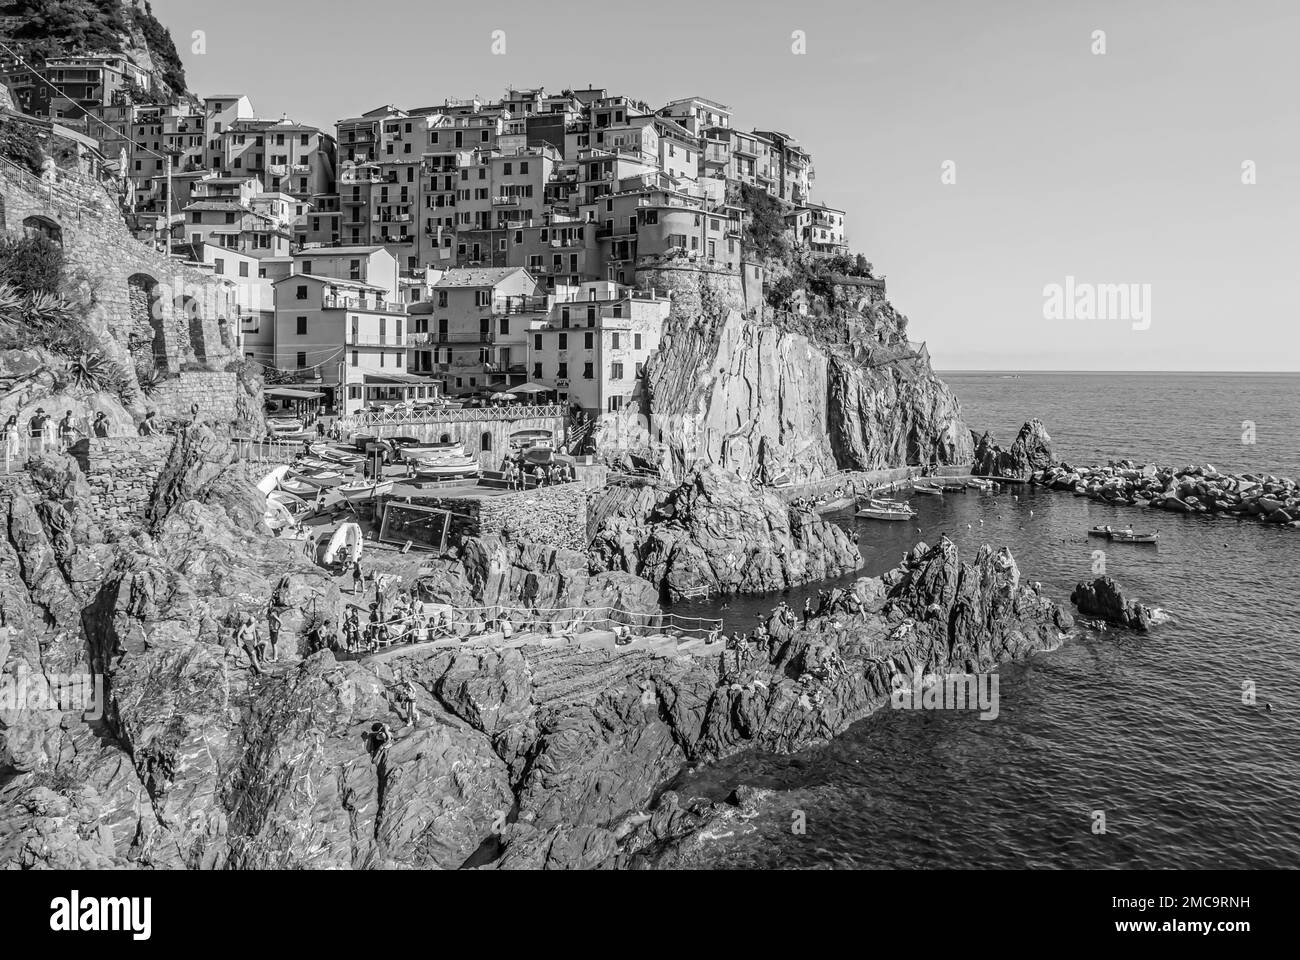 View at the village Manarola at Cinque Terre National Park, Liguria, Italy, in black and white Stock Photo